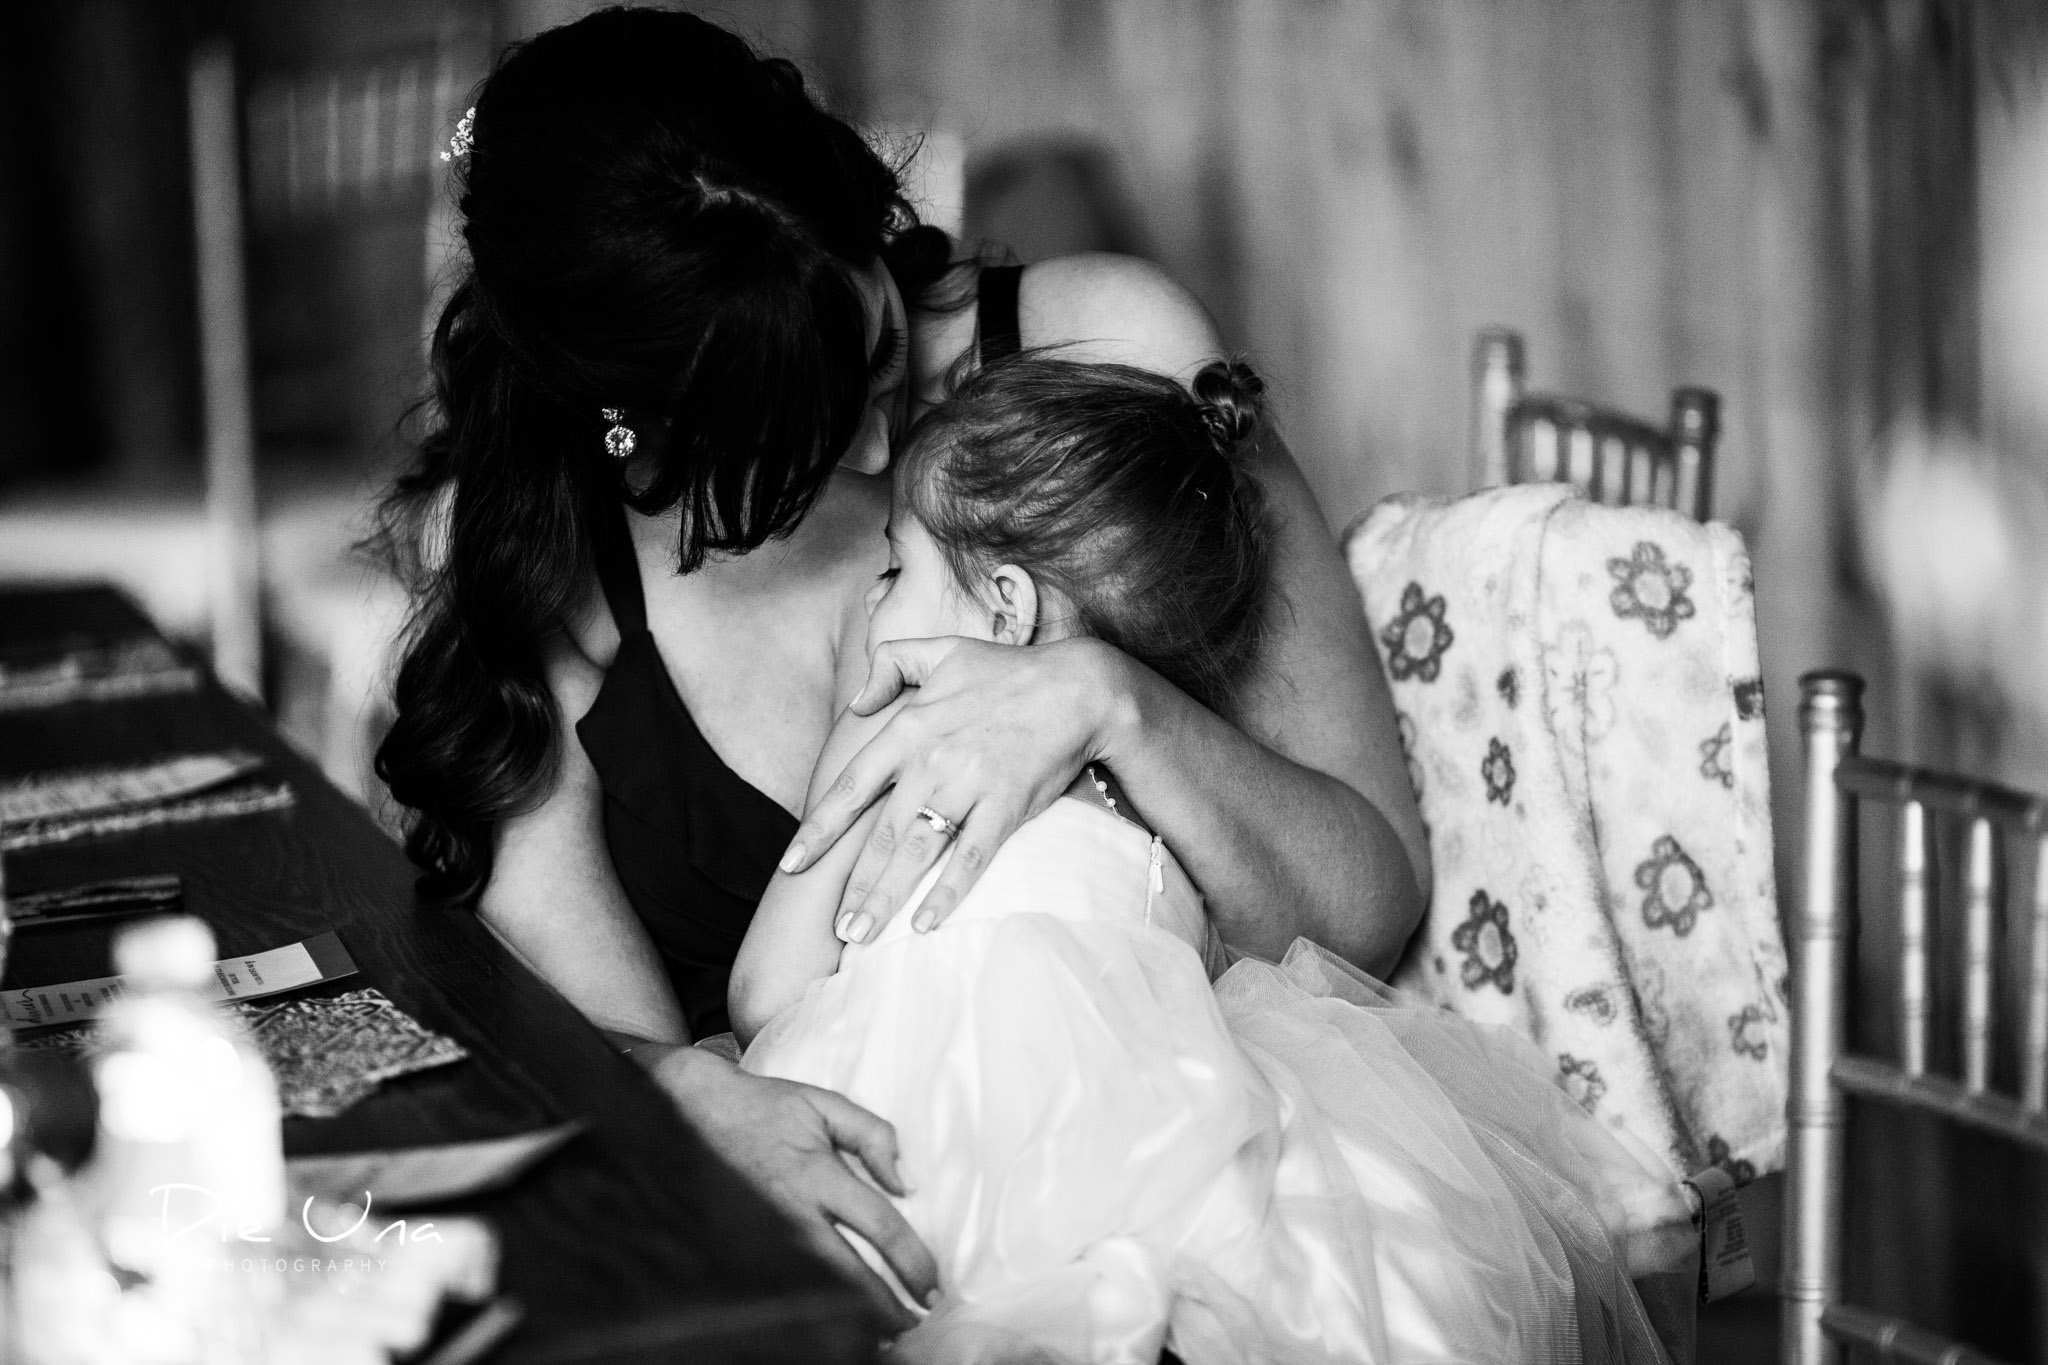 flower girl being hugged by her mom during wedding reception black and white wedding photography.jpg